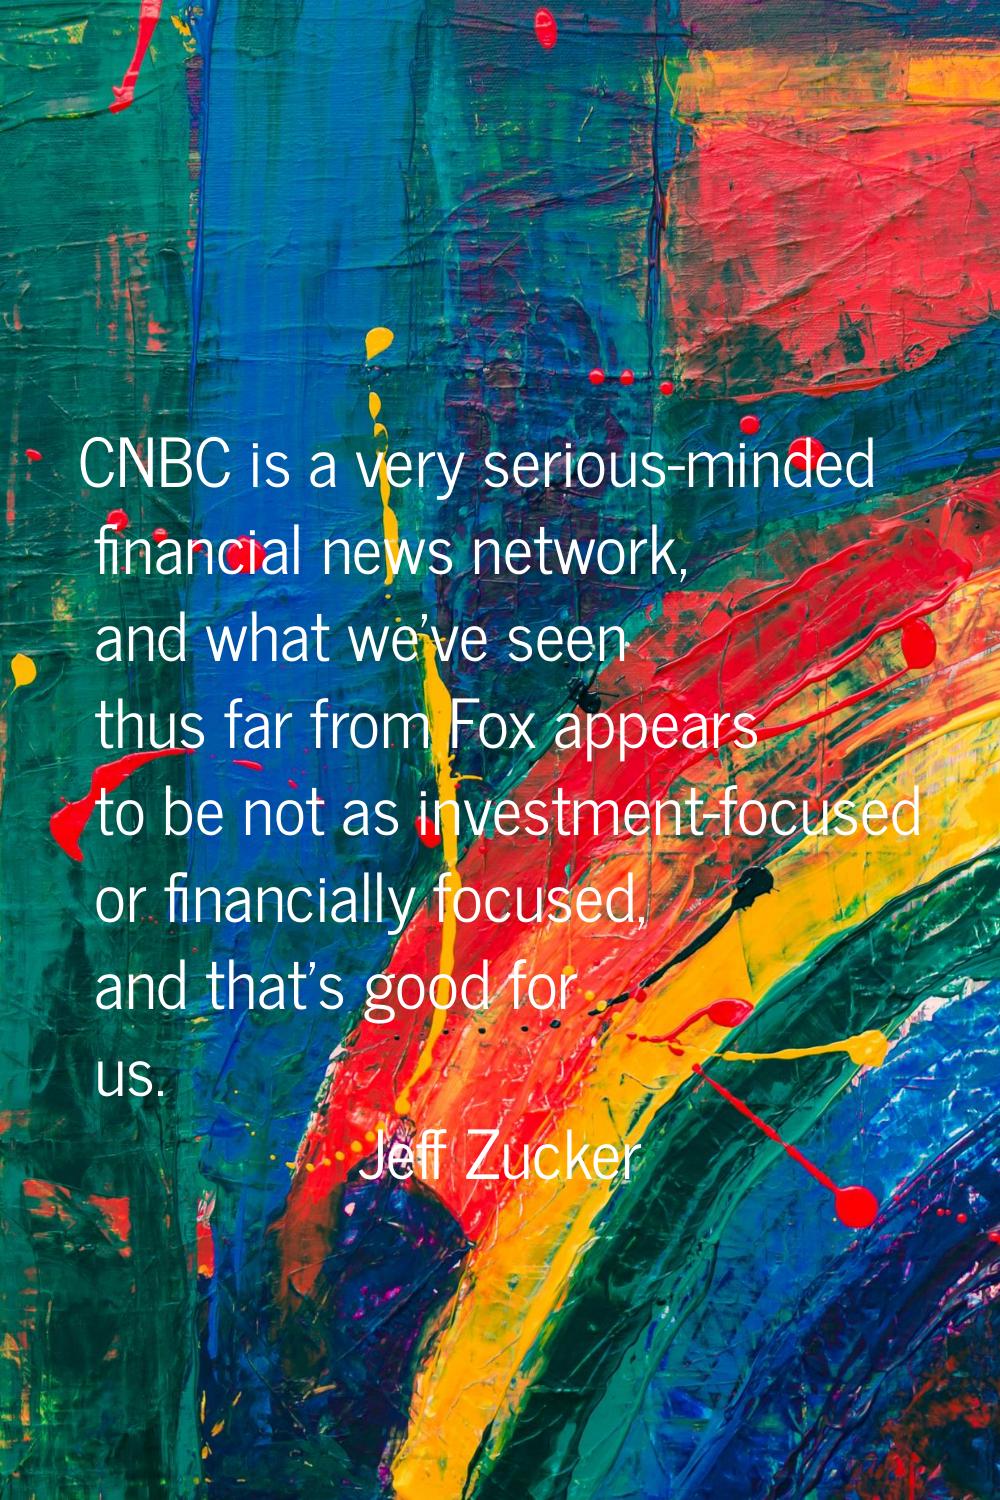 CNBC is a very serious-minded financial news network, and what we've seen thus far from Fox appears